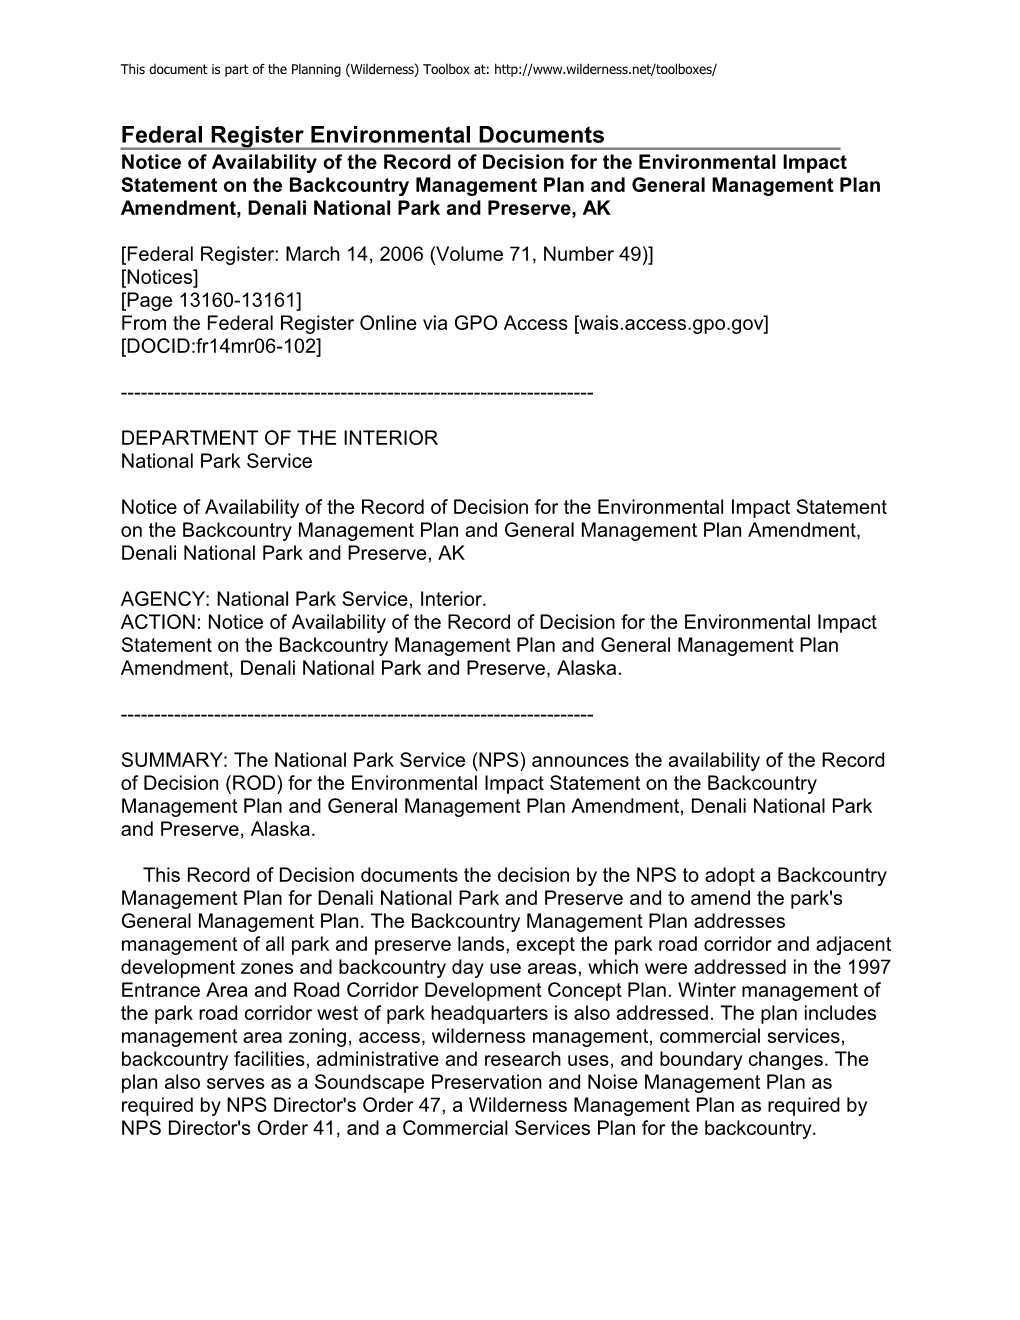 Record of Decision: Denali National Park and Preserve Backcountry Management Plan